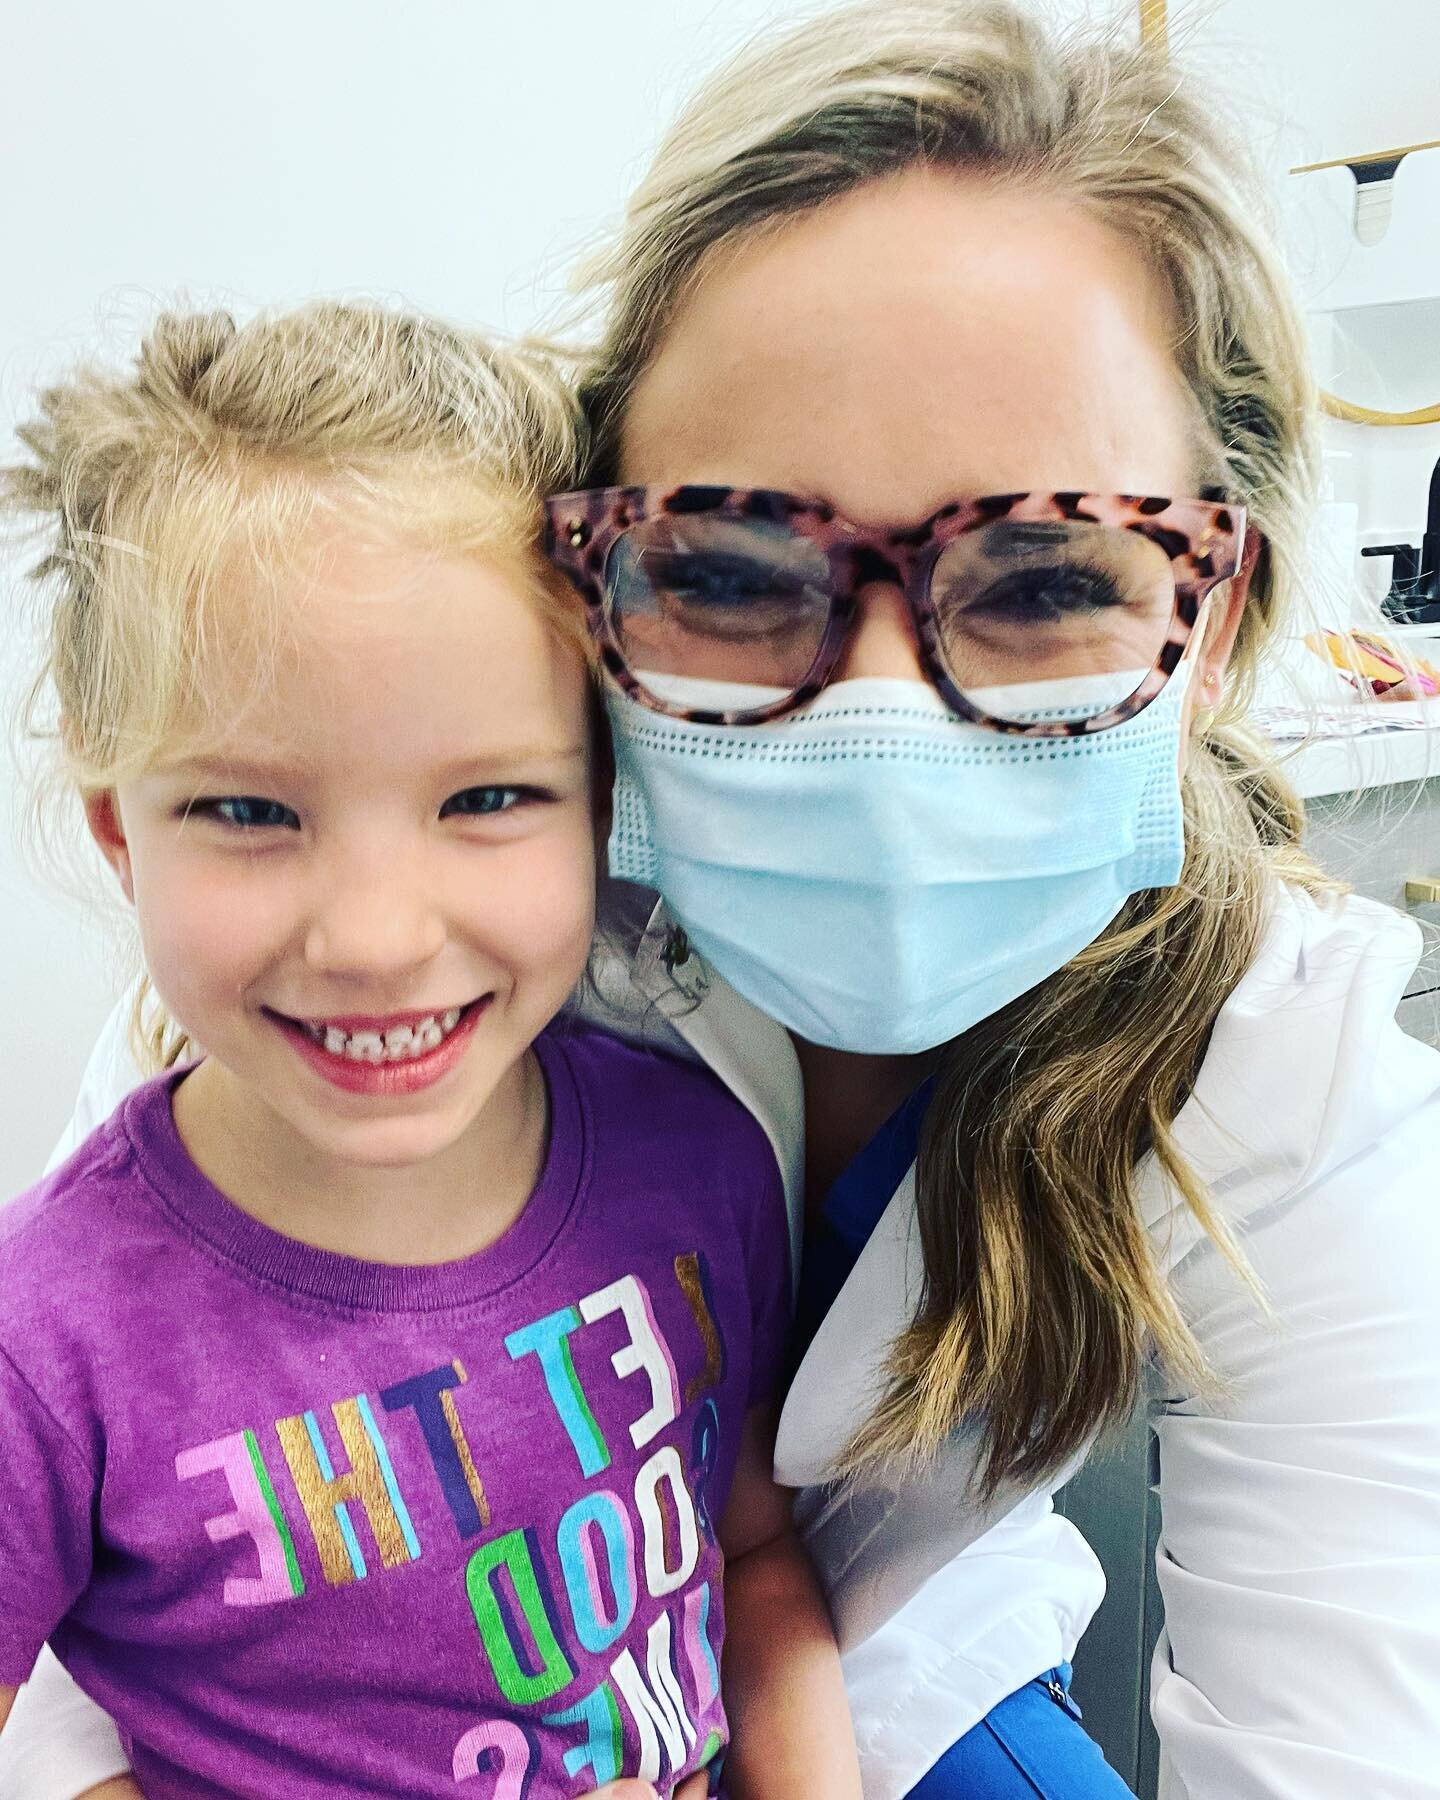 &lsquo;She was nervous and ended up having a great time! She told me all about it when she got home. Thanks Dr. Amy for a job well done&rsquo; -Dad

At Kenny Dental we understand a new environment can be intimidating for young ones&hellip;
We strive 